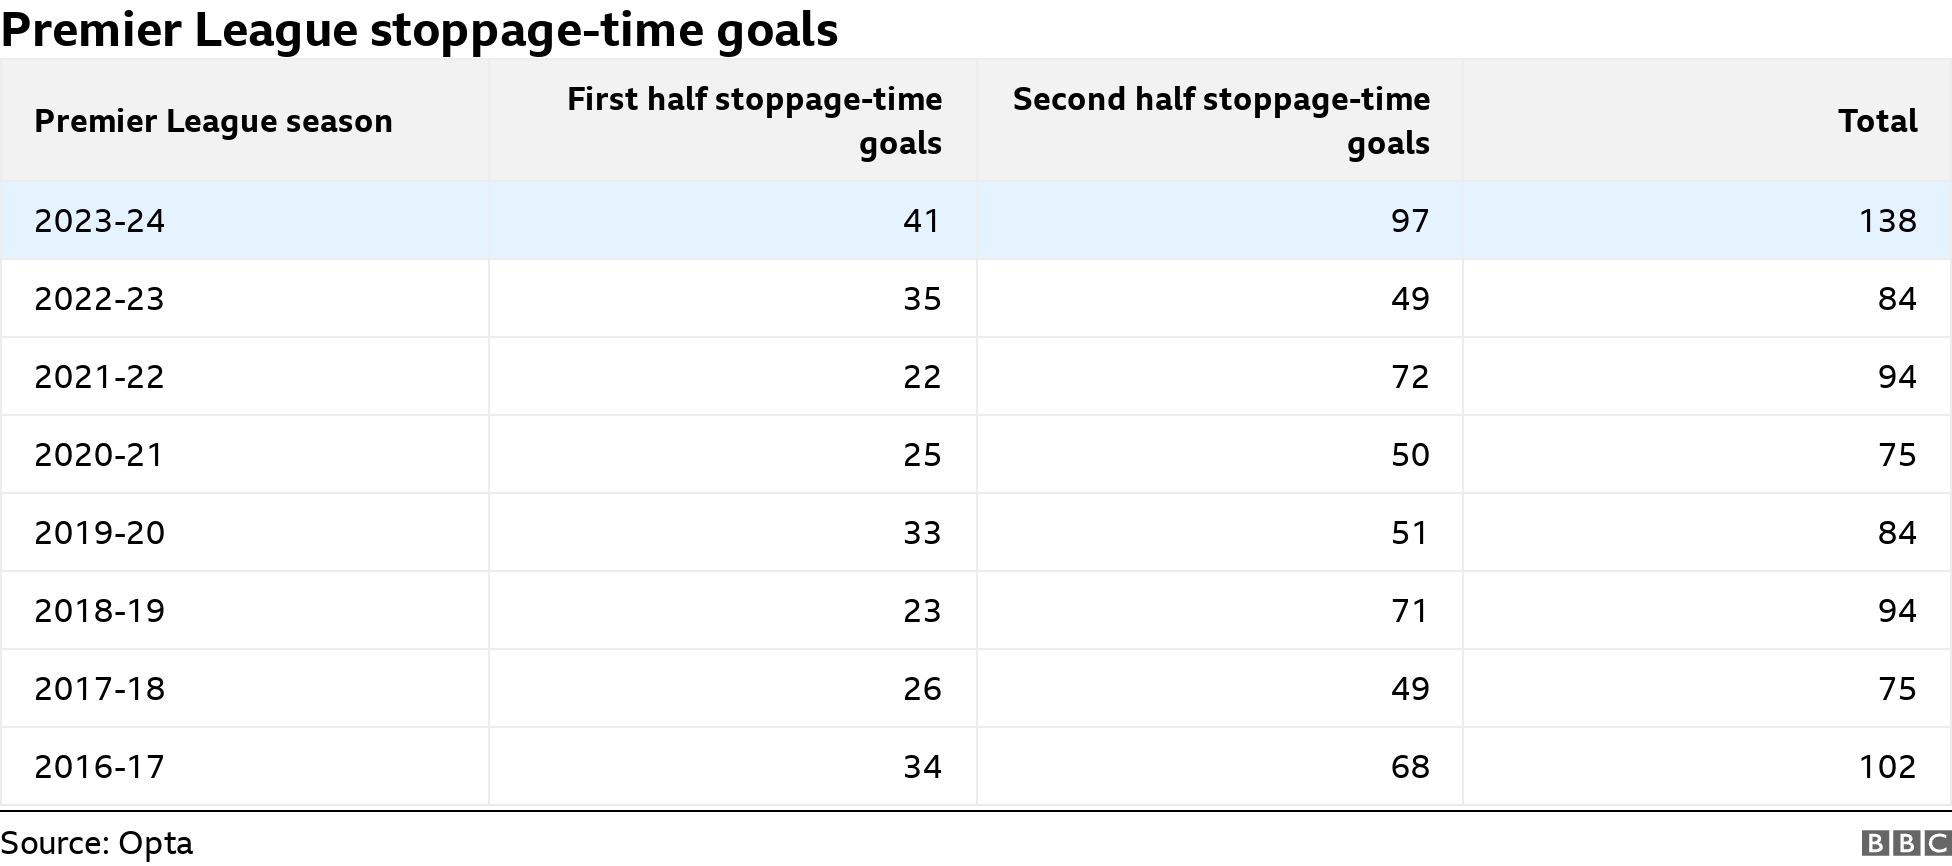 why so many goals in this season's premier league?